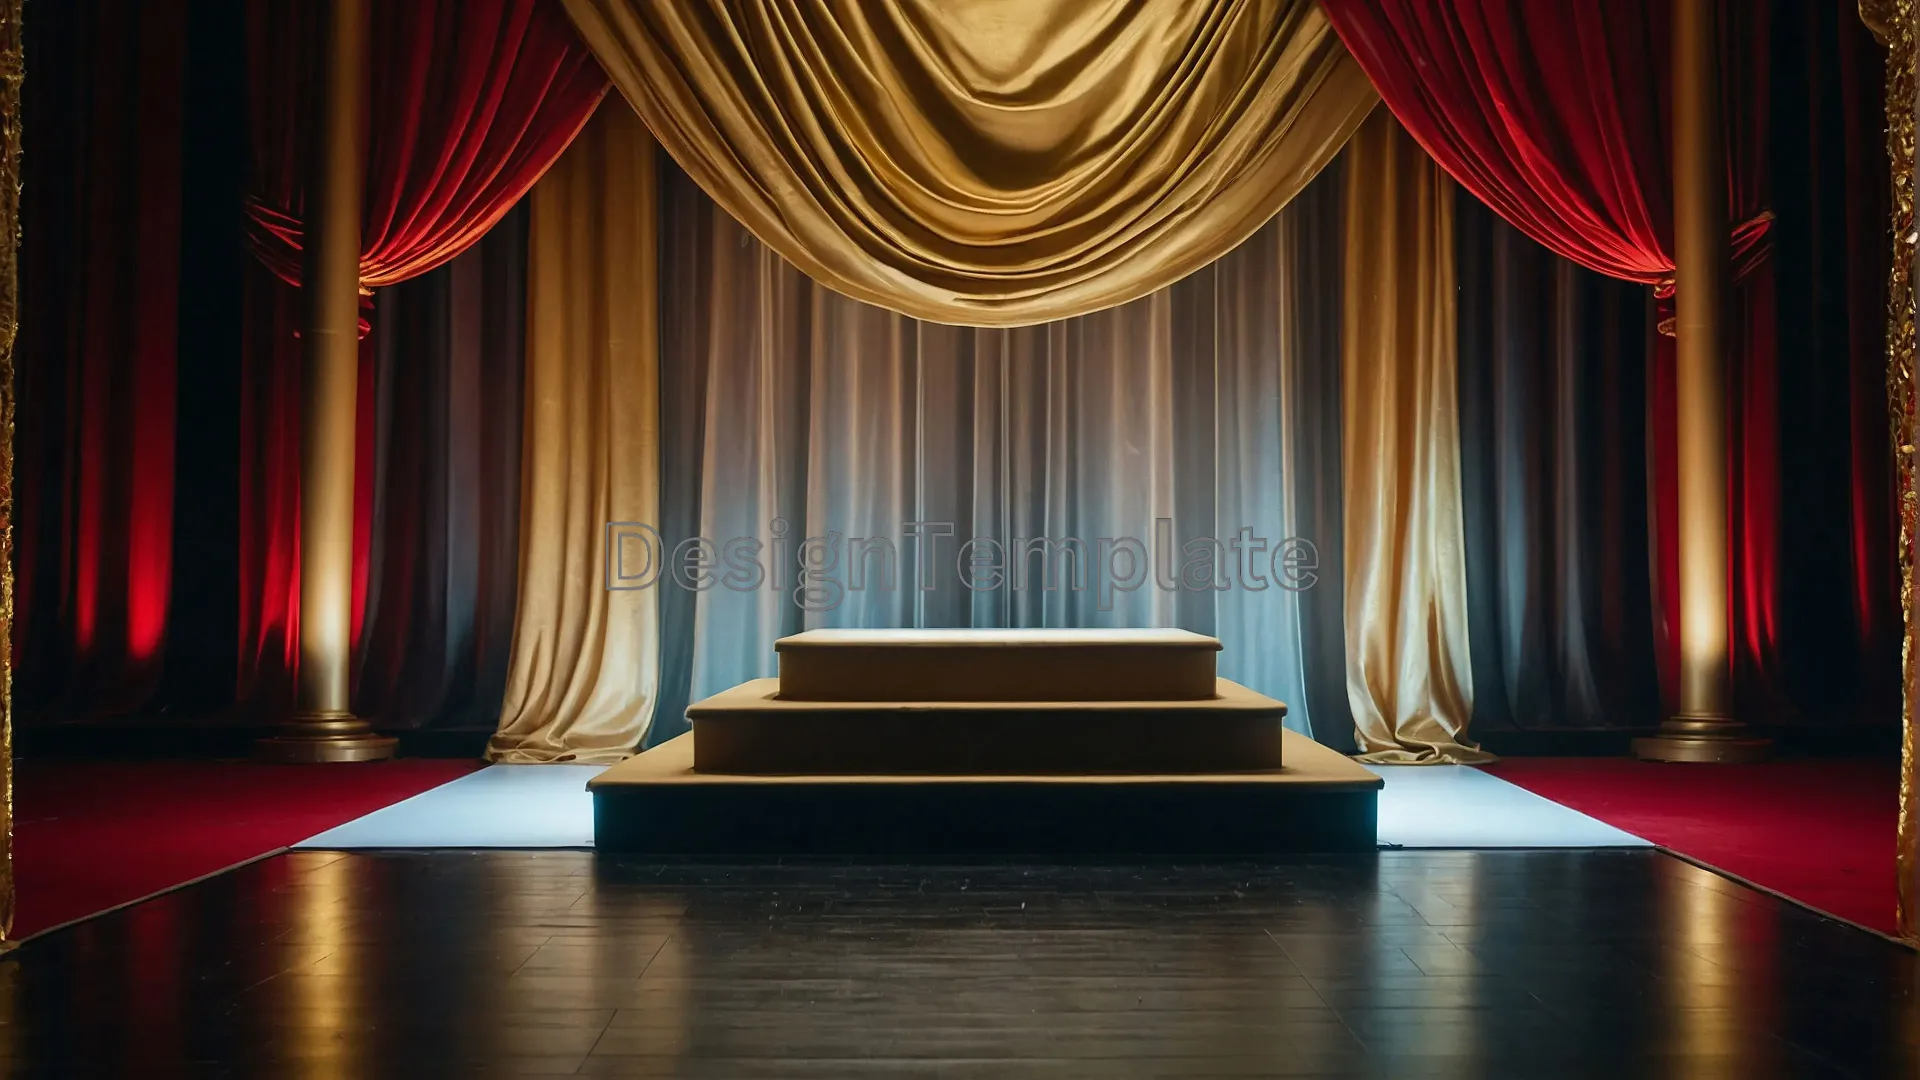 Luminous Texture Award Show Stage Shines with Golden Fabric